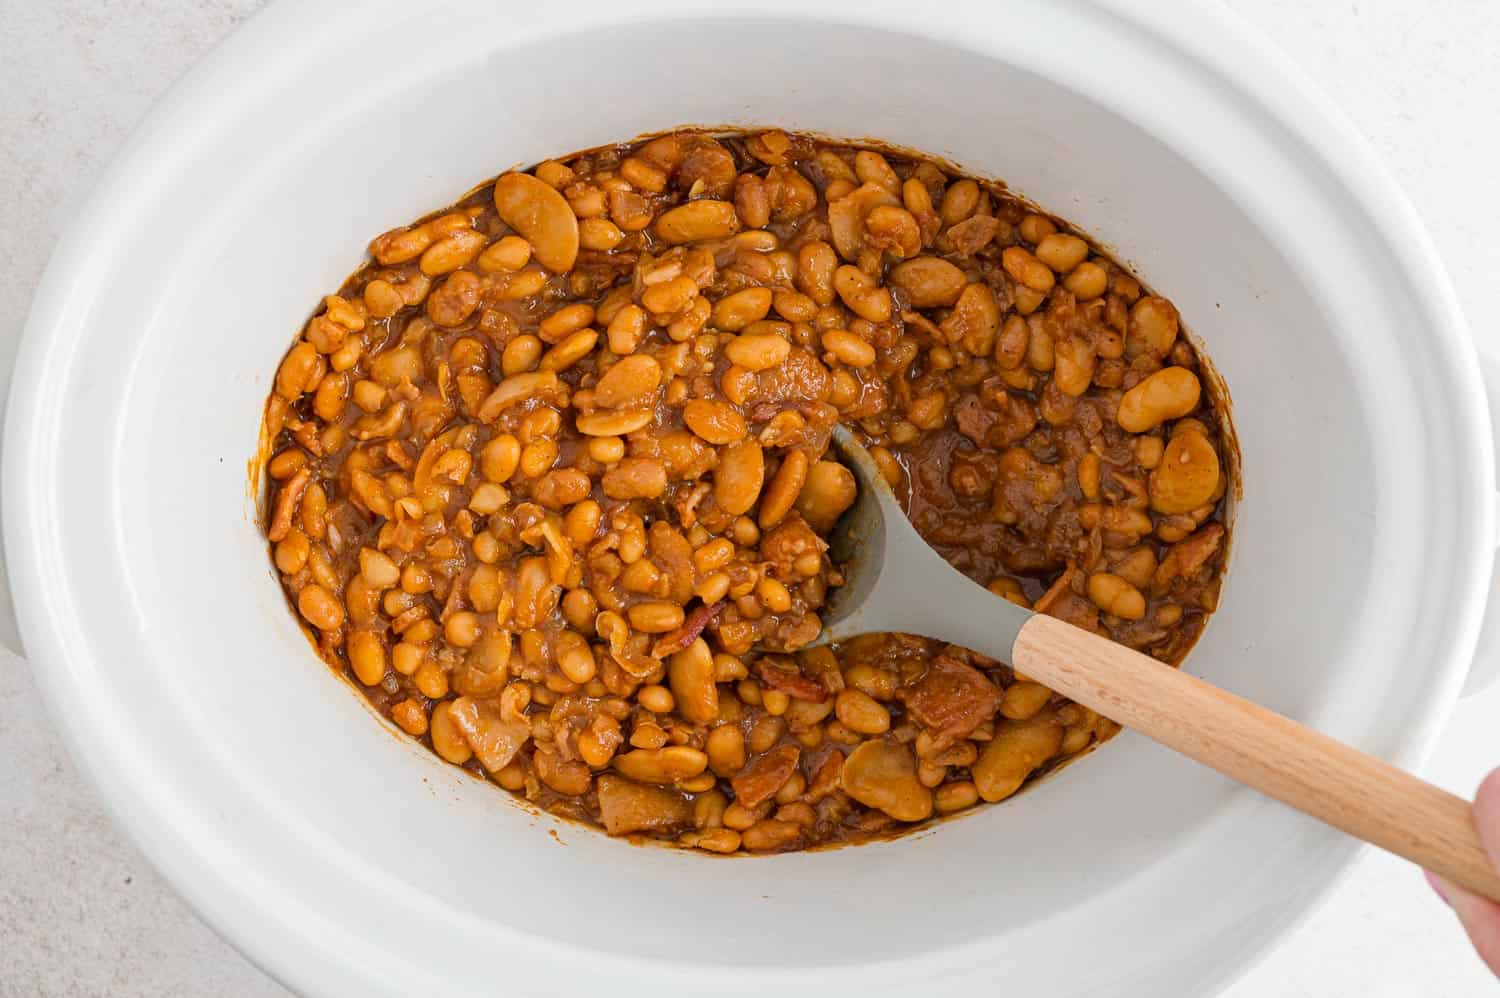 Cooked baked beans in a crock pot.